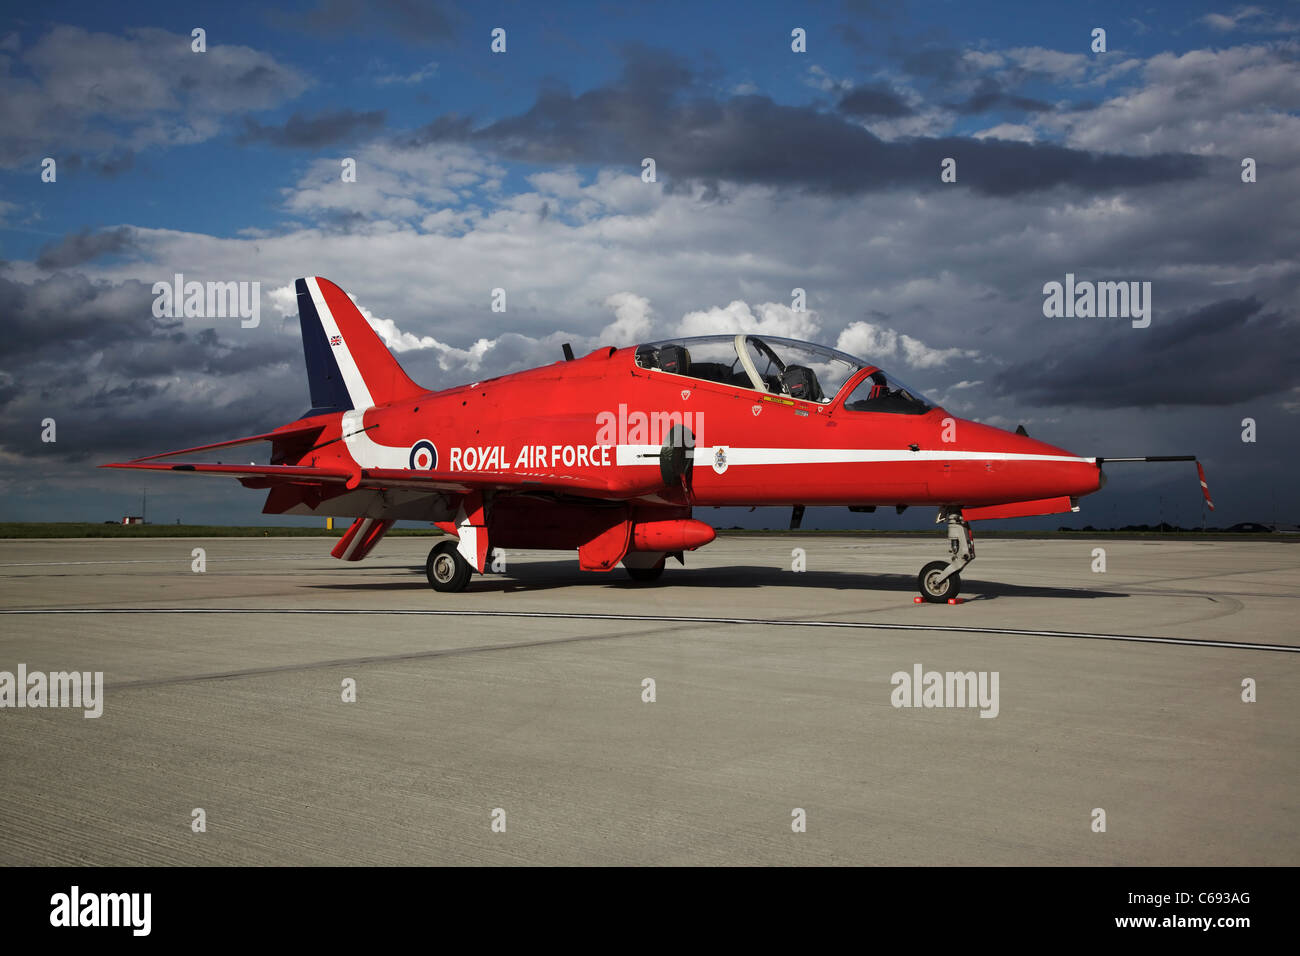 A Bae systems Hawk T1 training aircraft of the RAF's Red Arrows aerobatic team Stock Photo